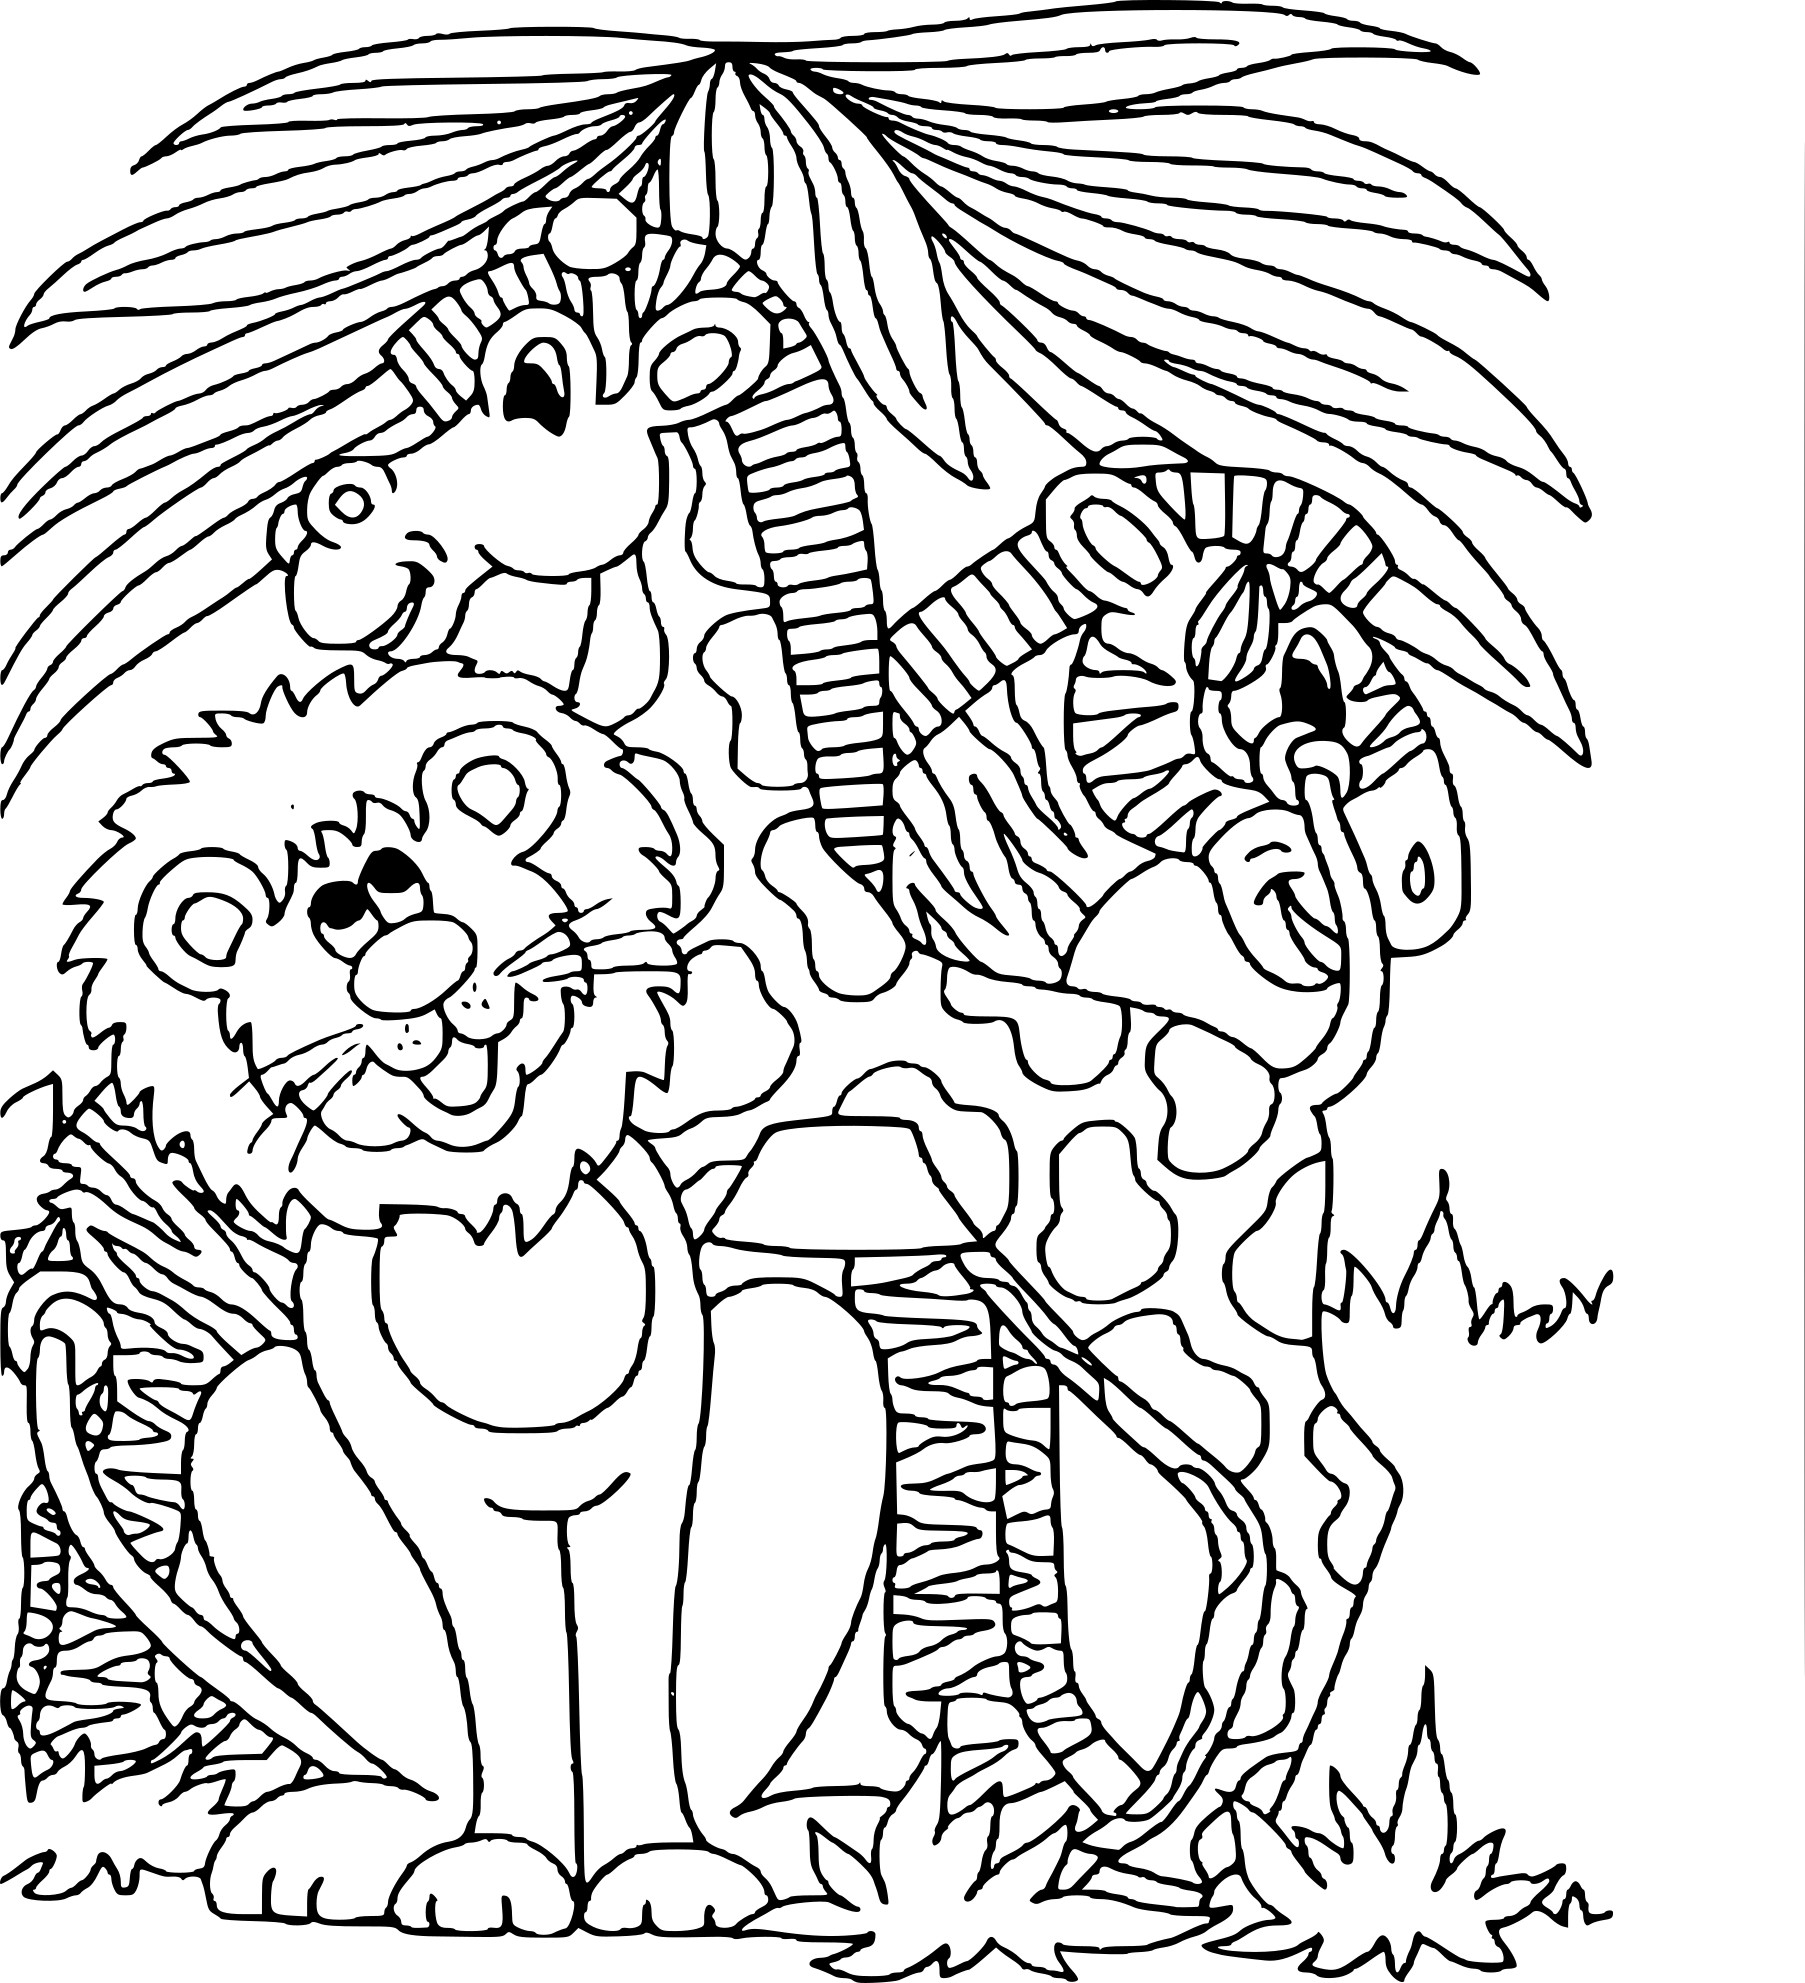 Zoo Animals coloring page - free printable coloring pages on coloori.com